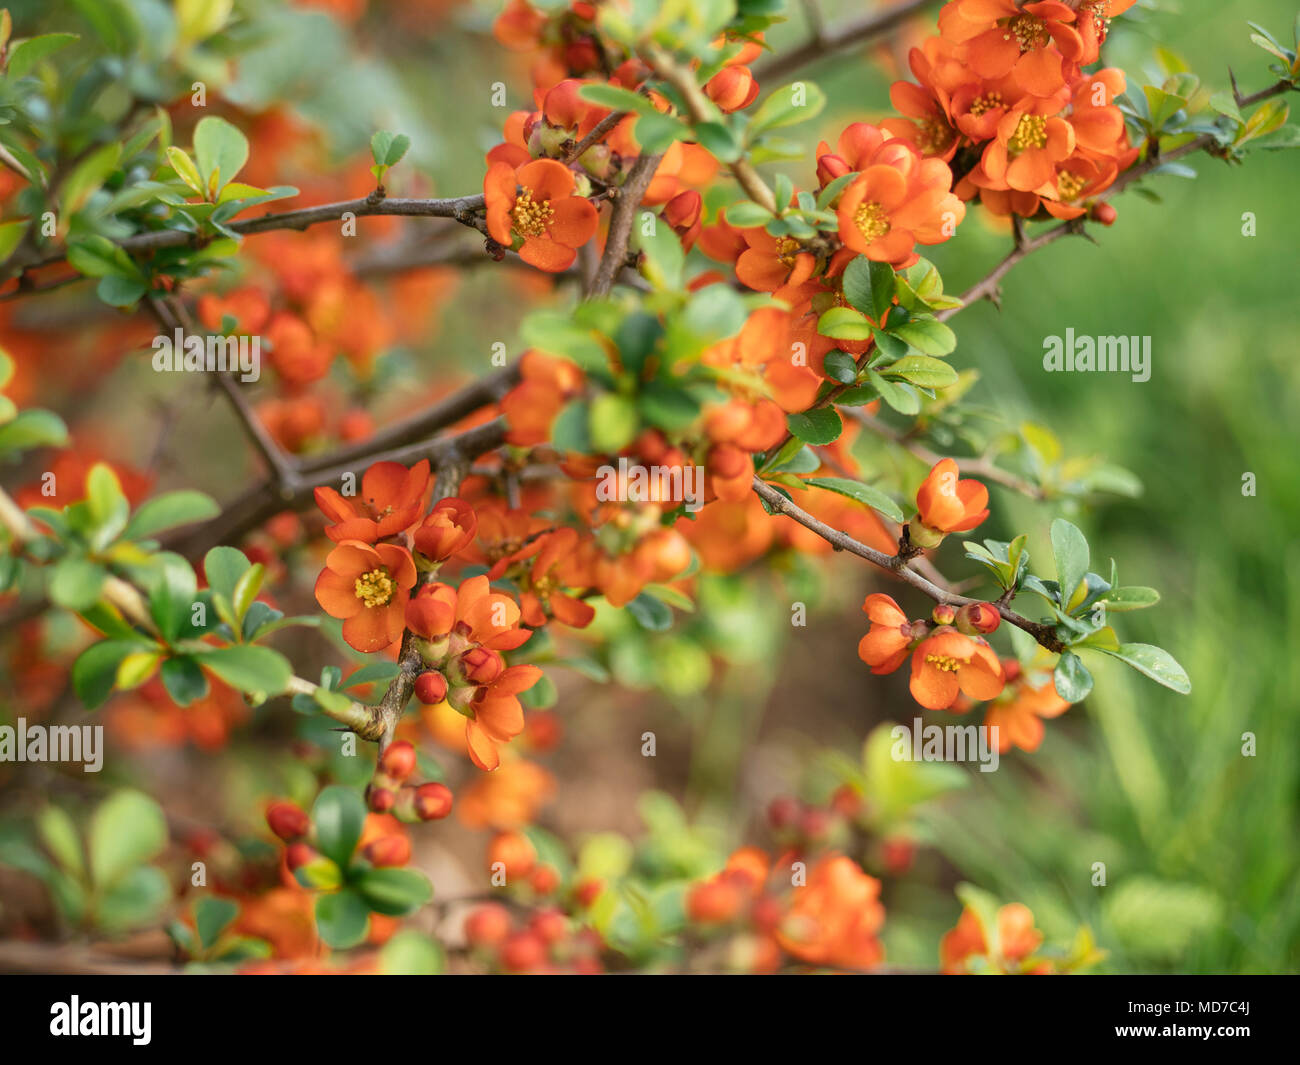 Close-up of Japanese quince (Chaenomeles japonica) blossoms Stock Photo